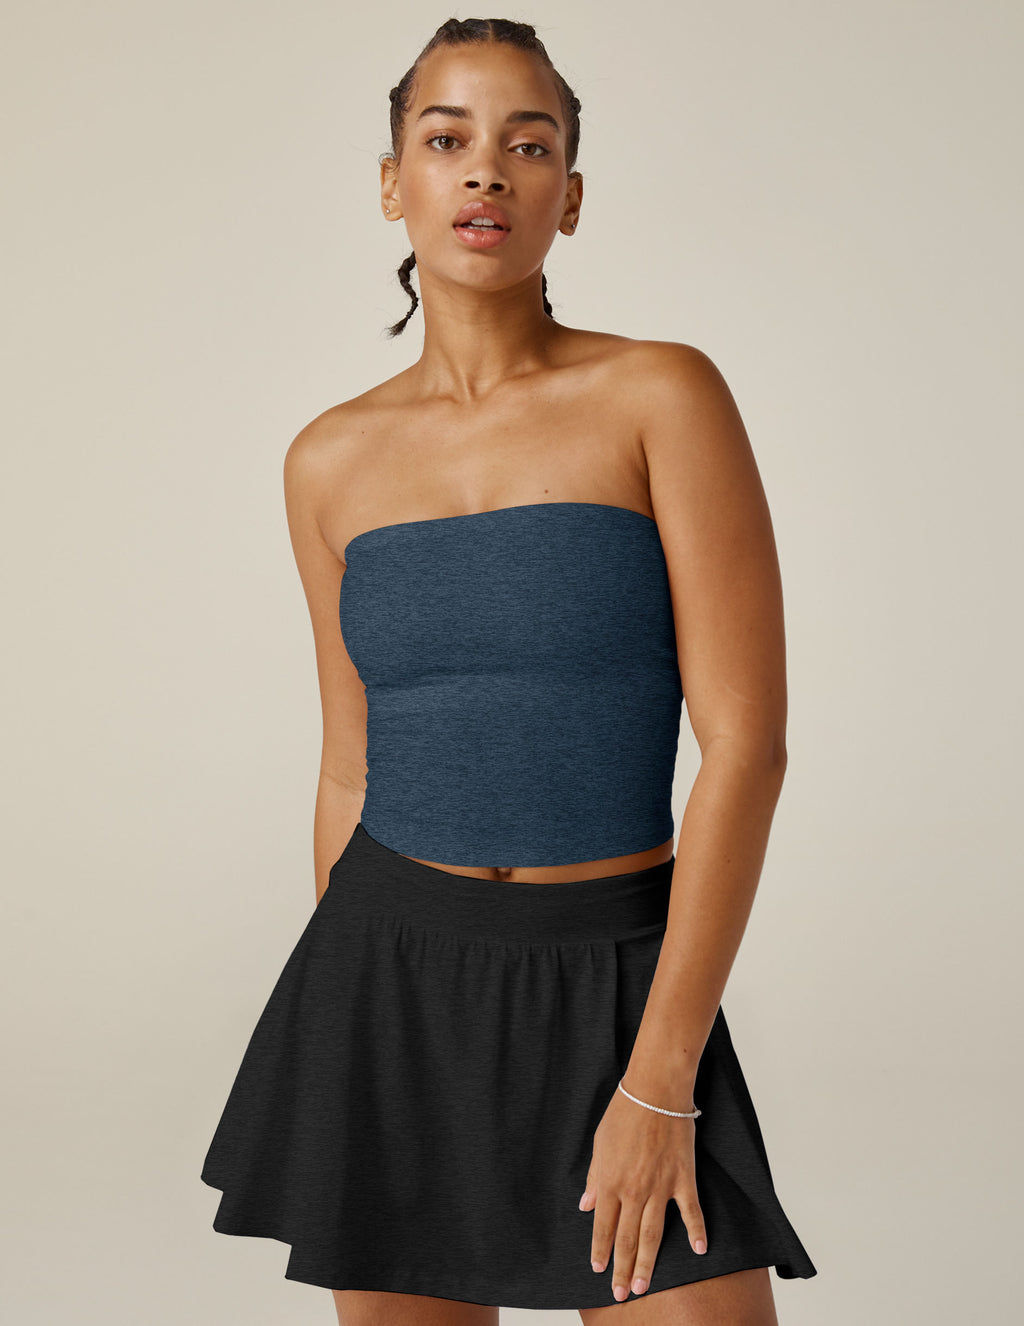 Spacedye Strapless Top Featured Image